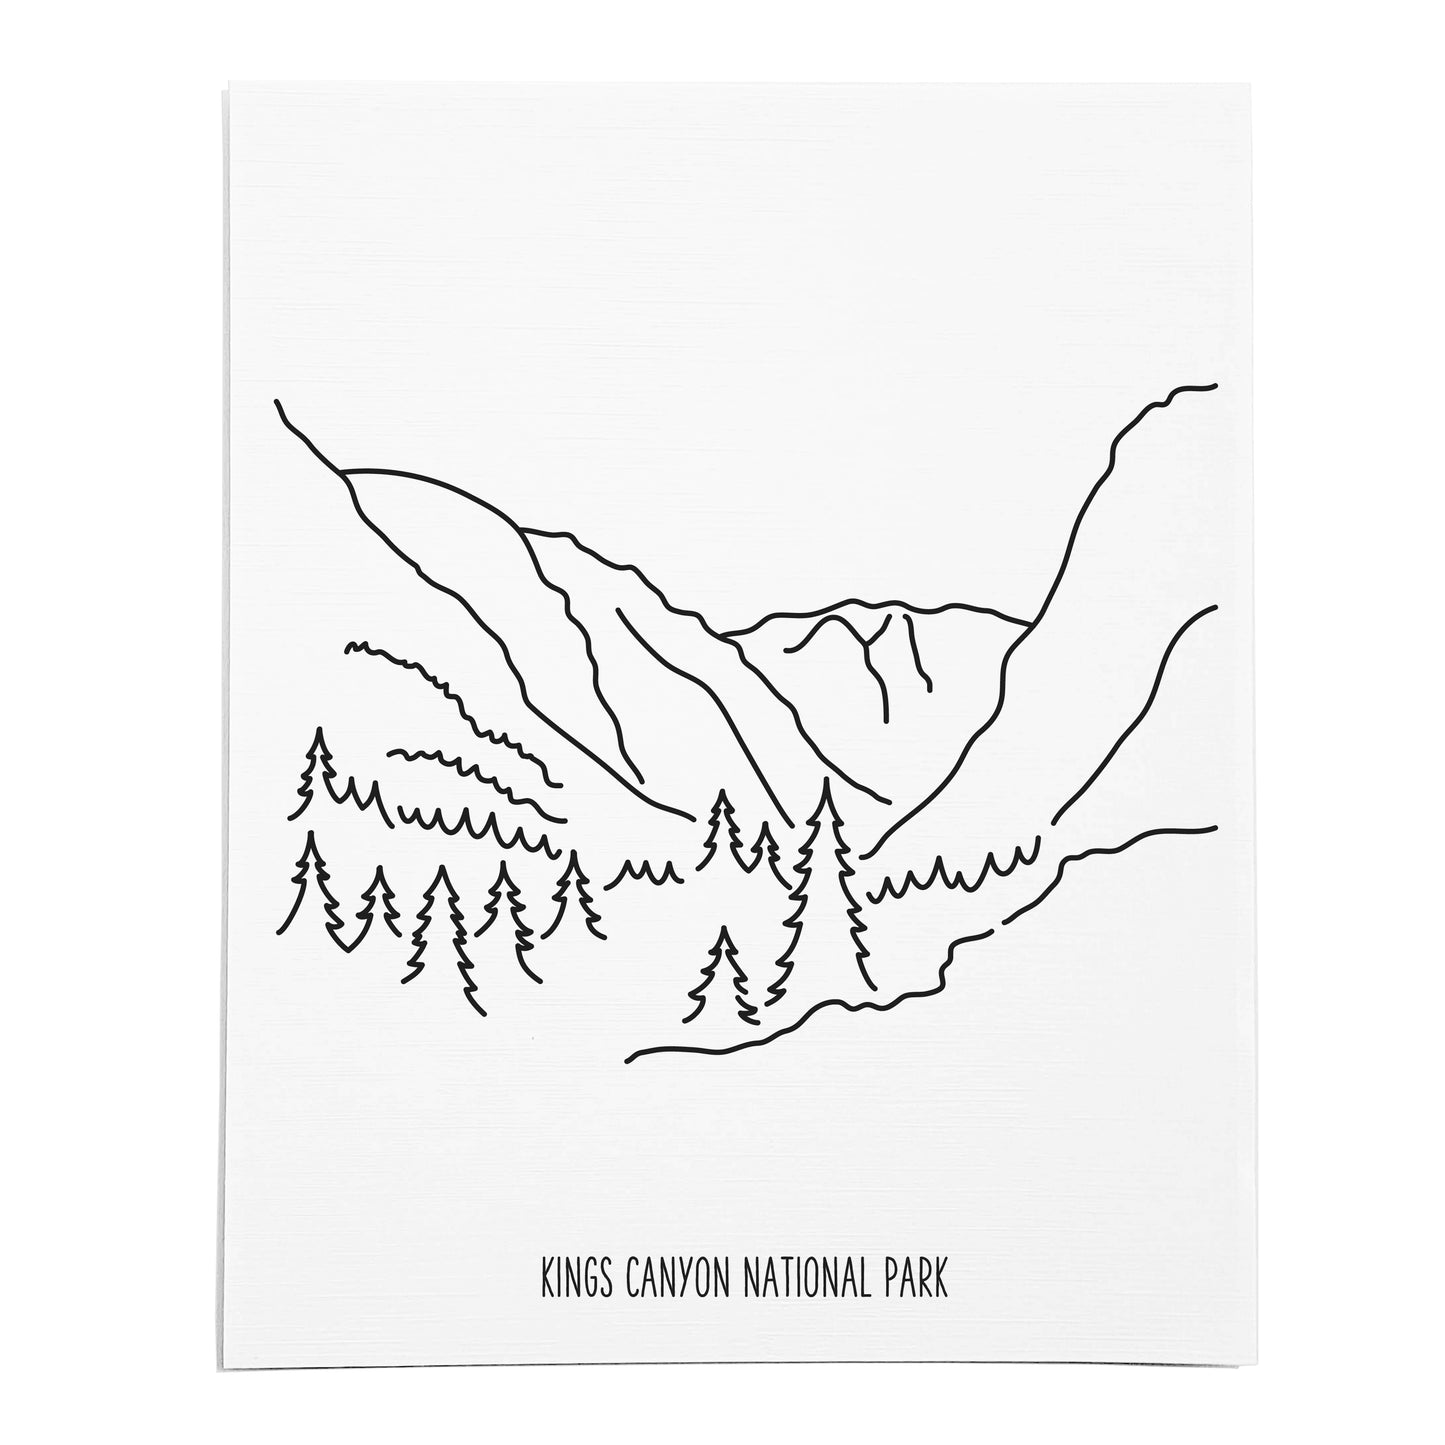 An art print featuring a line drawing of Kings Canyon National Park on white linen paper